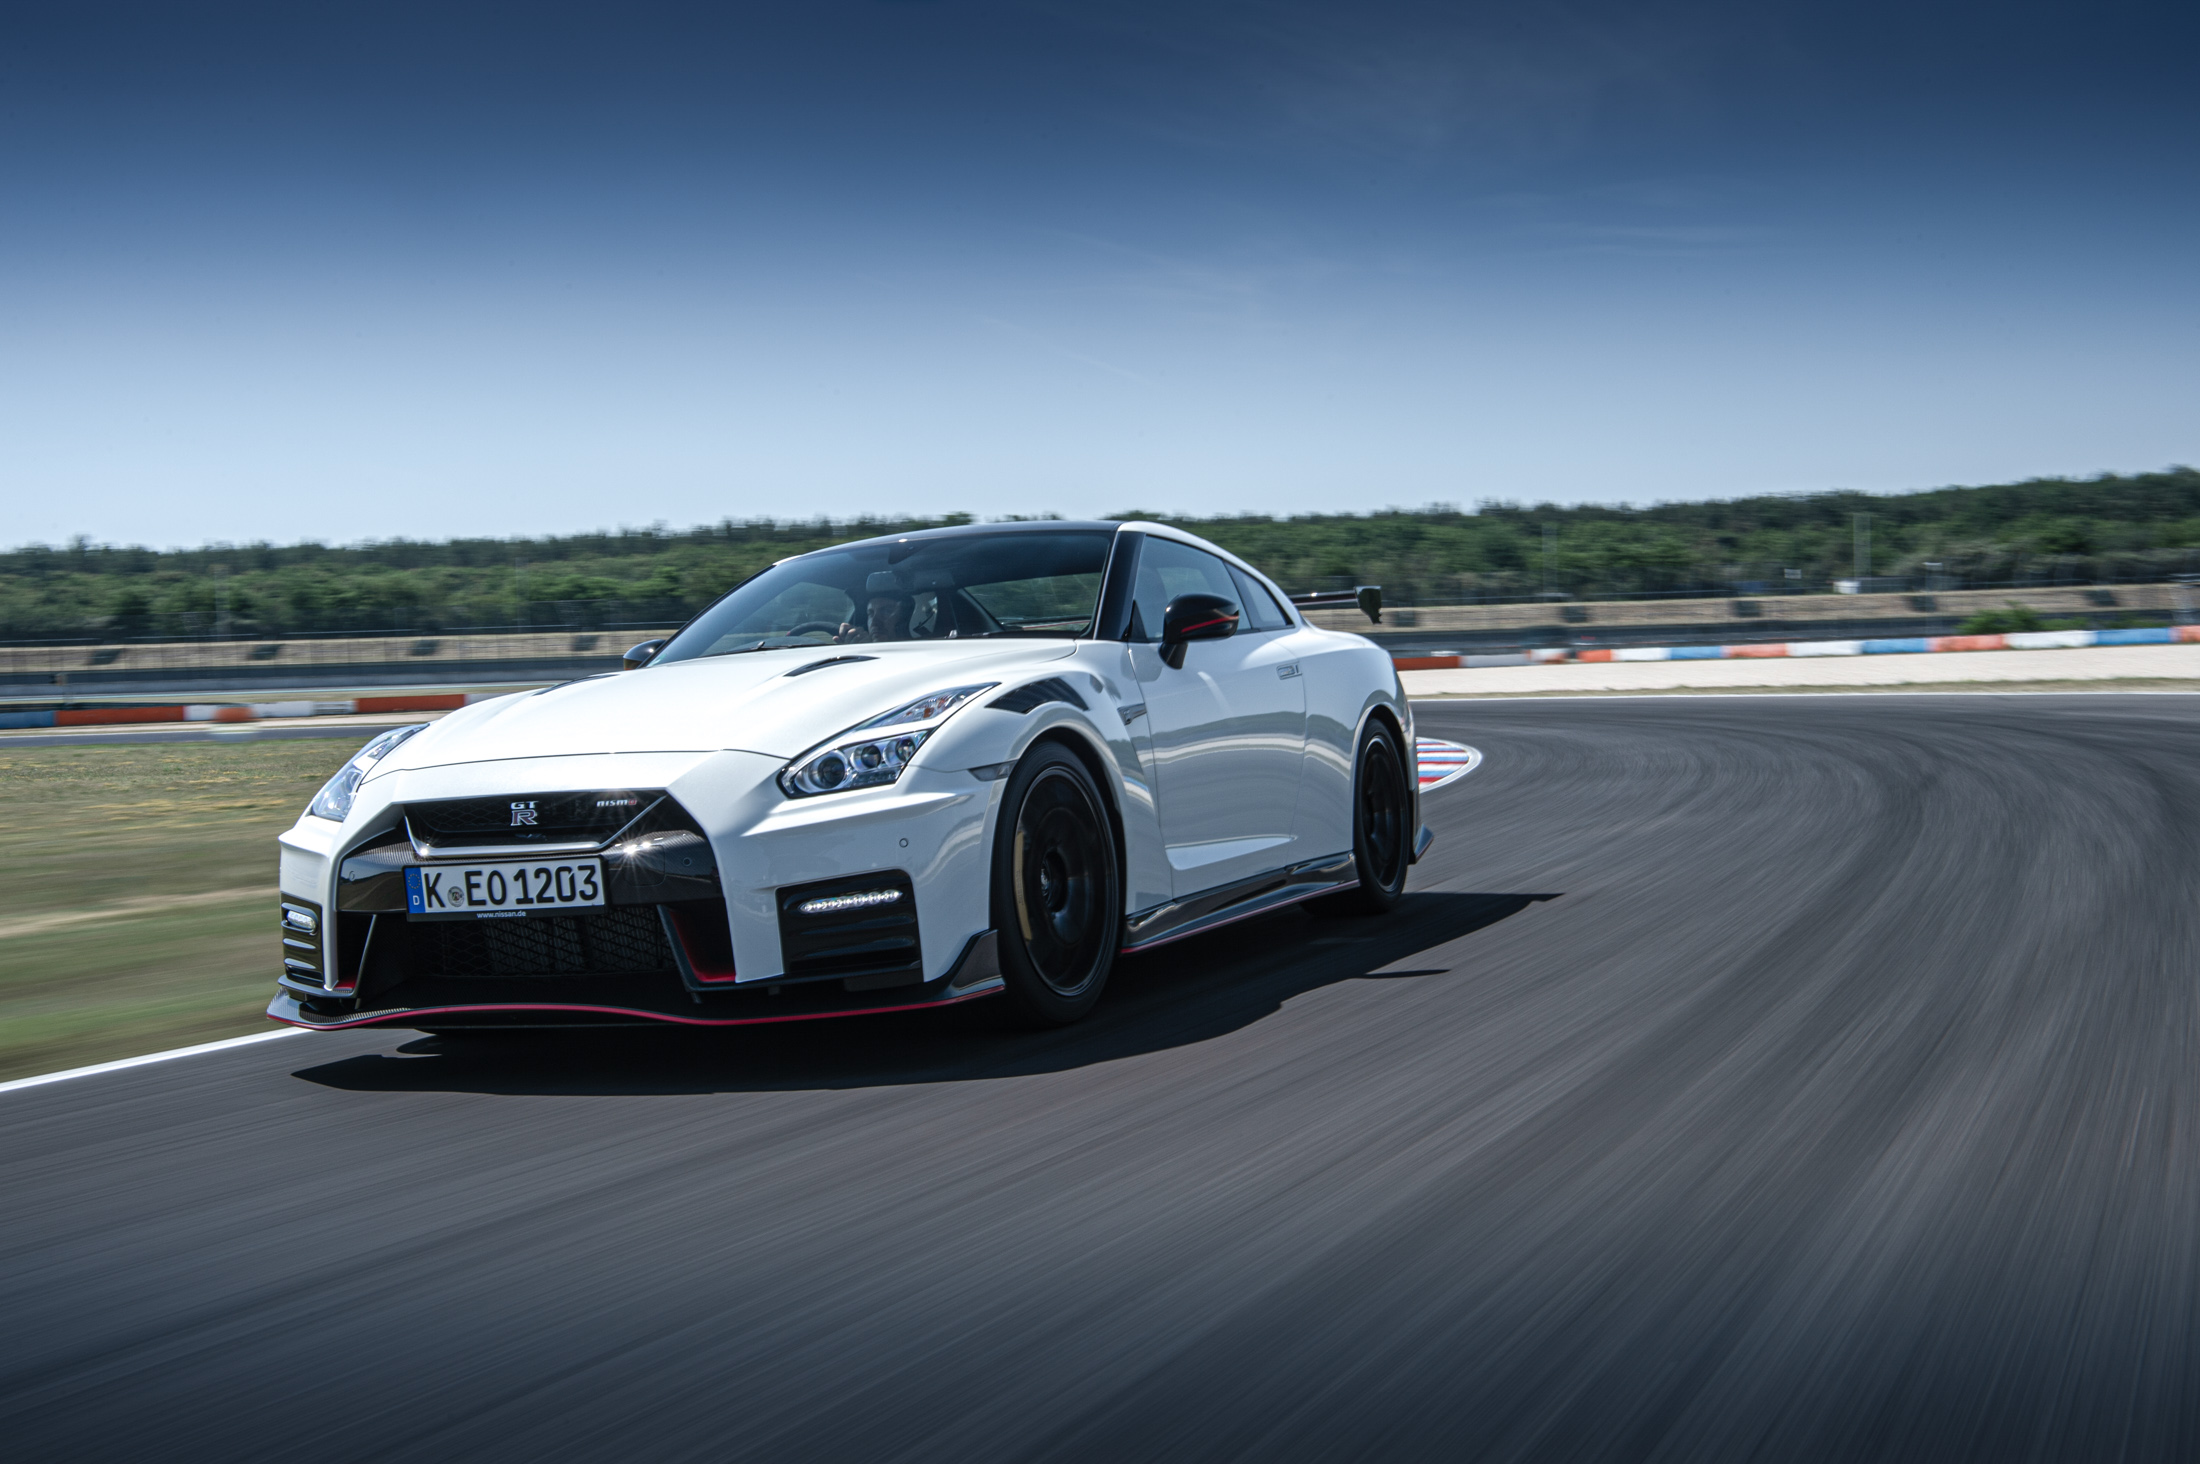 2020 Nissan GT-R Nismo Edition Review: Not Worth $212,000 - Bloomberg